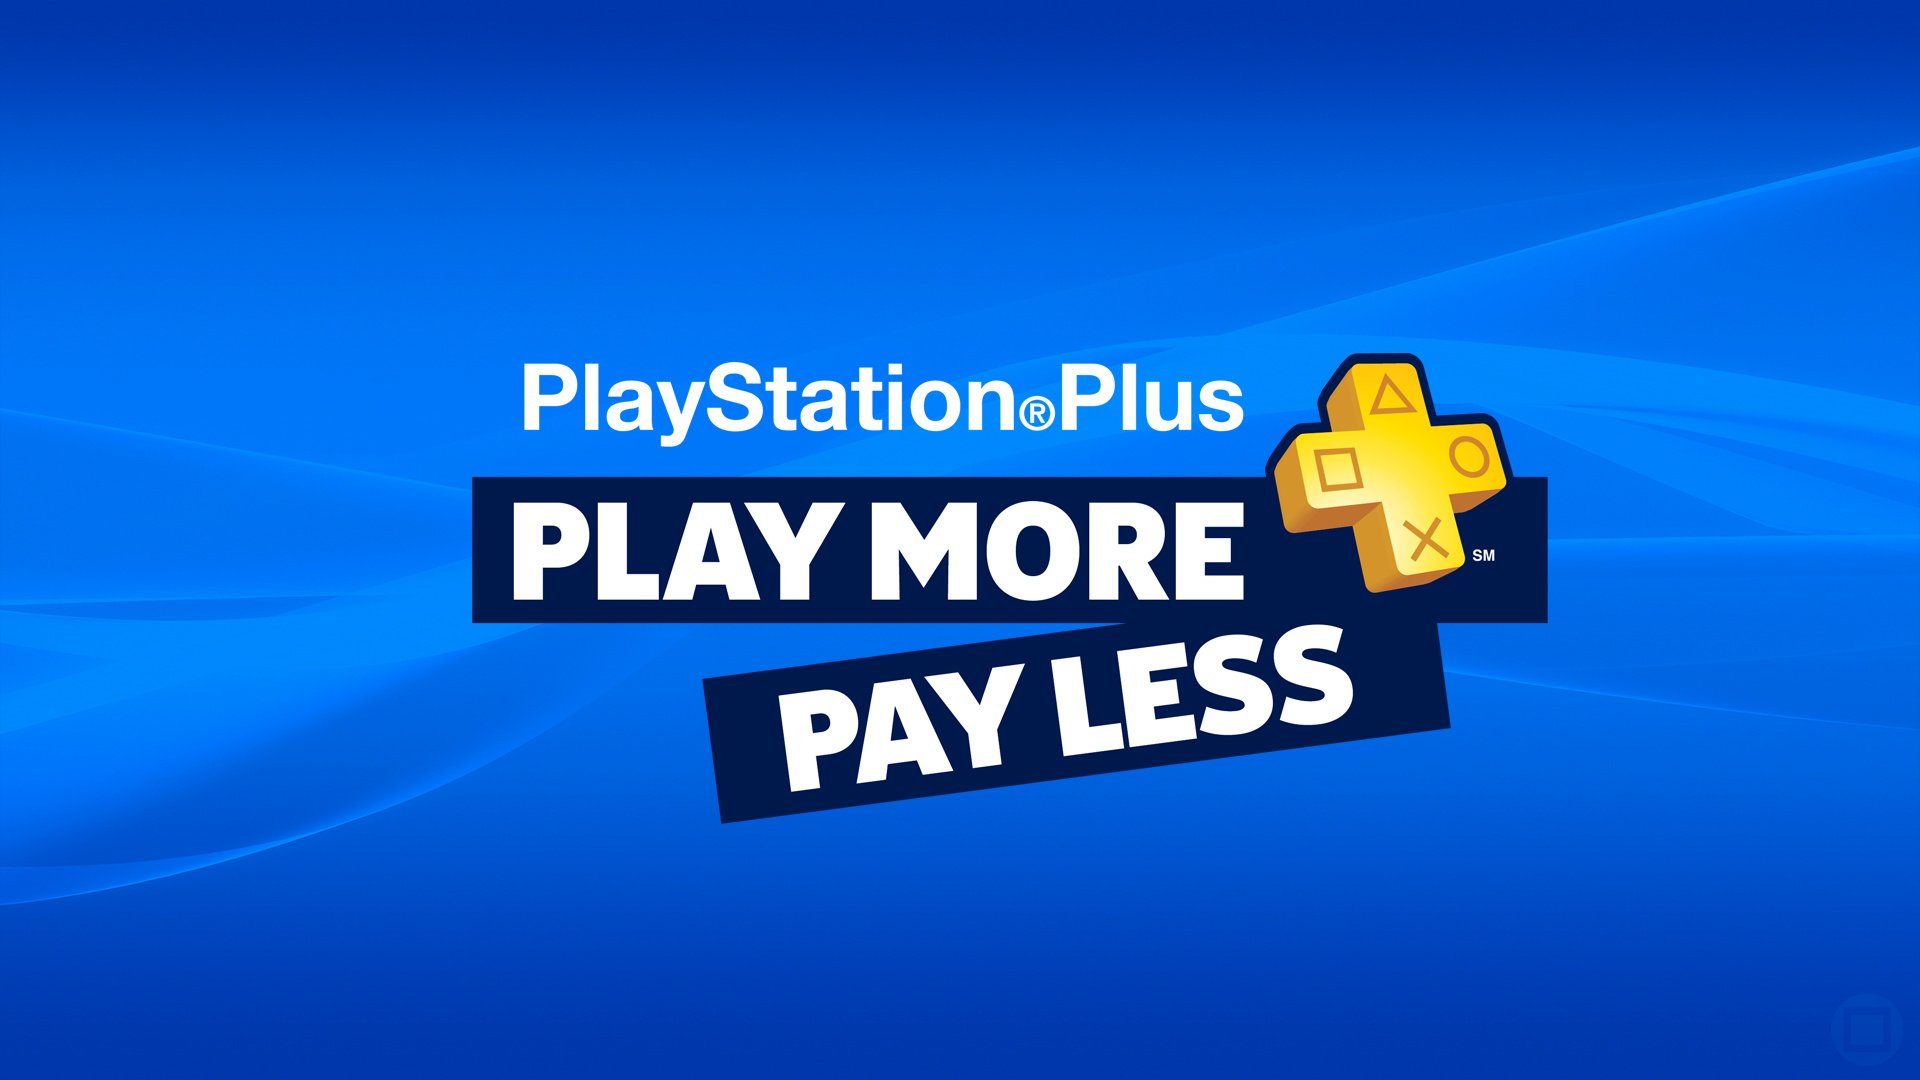 You Won't Need a PS Plus Subscription to Play PS4 Multiplayer This